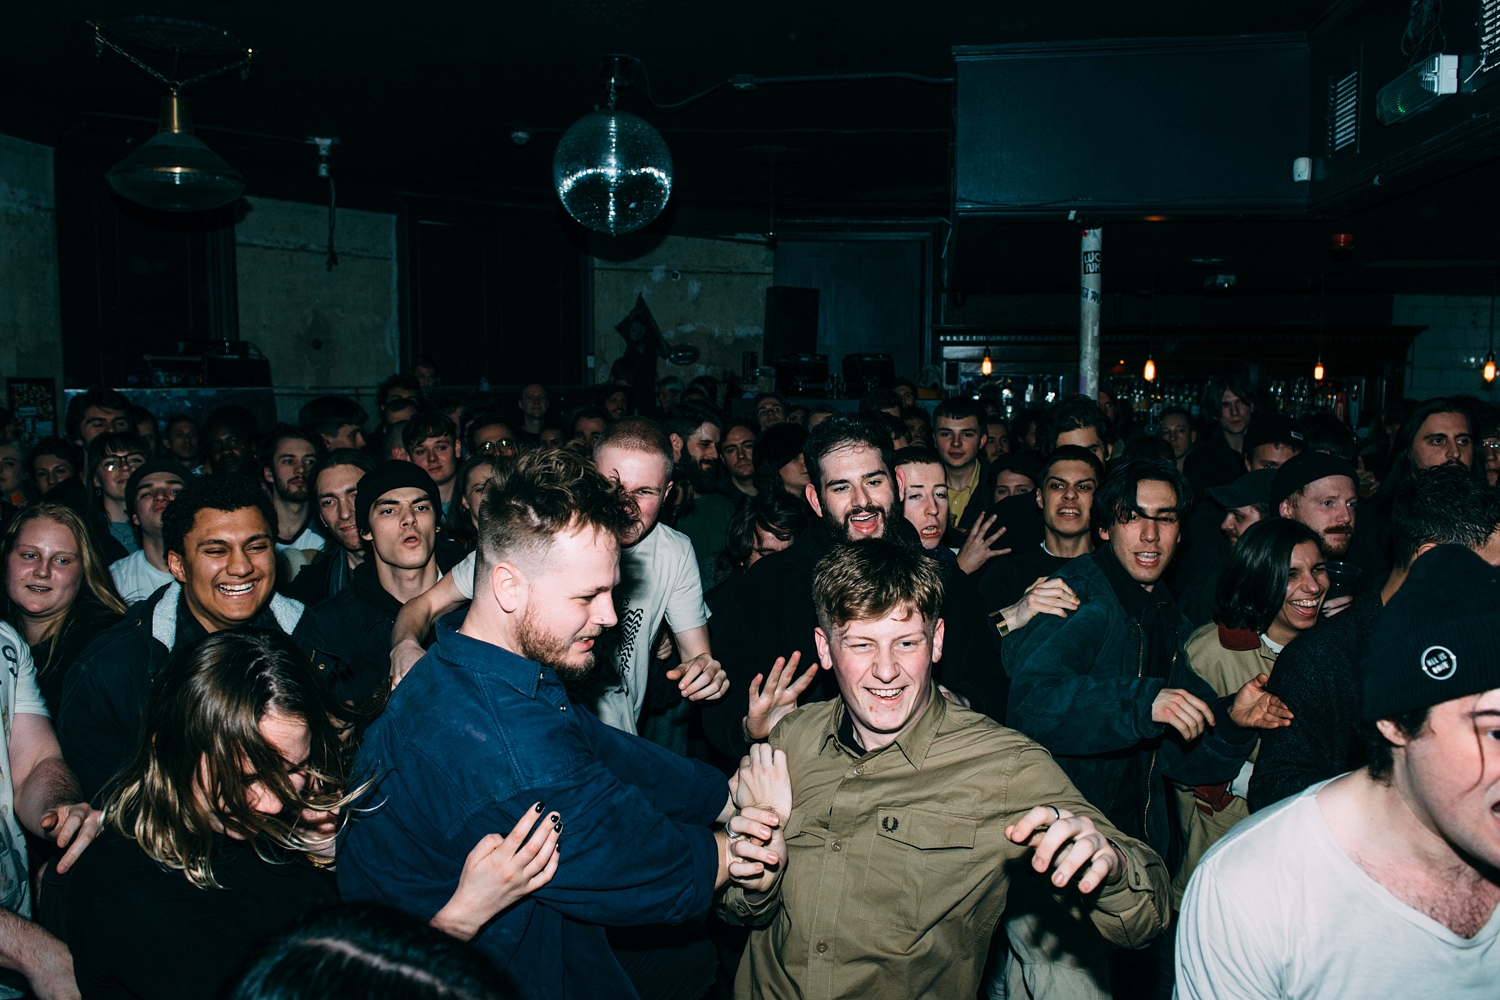 LICE, 404, Squid and Haze kick off Hello 2019 in hedonistic, sweaty style